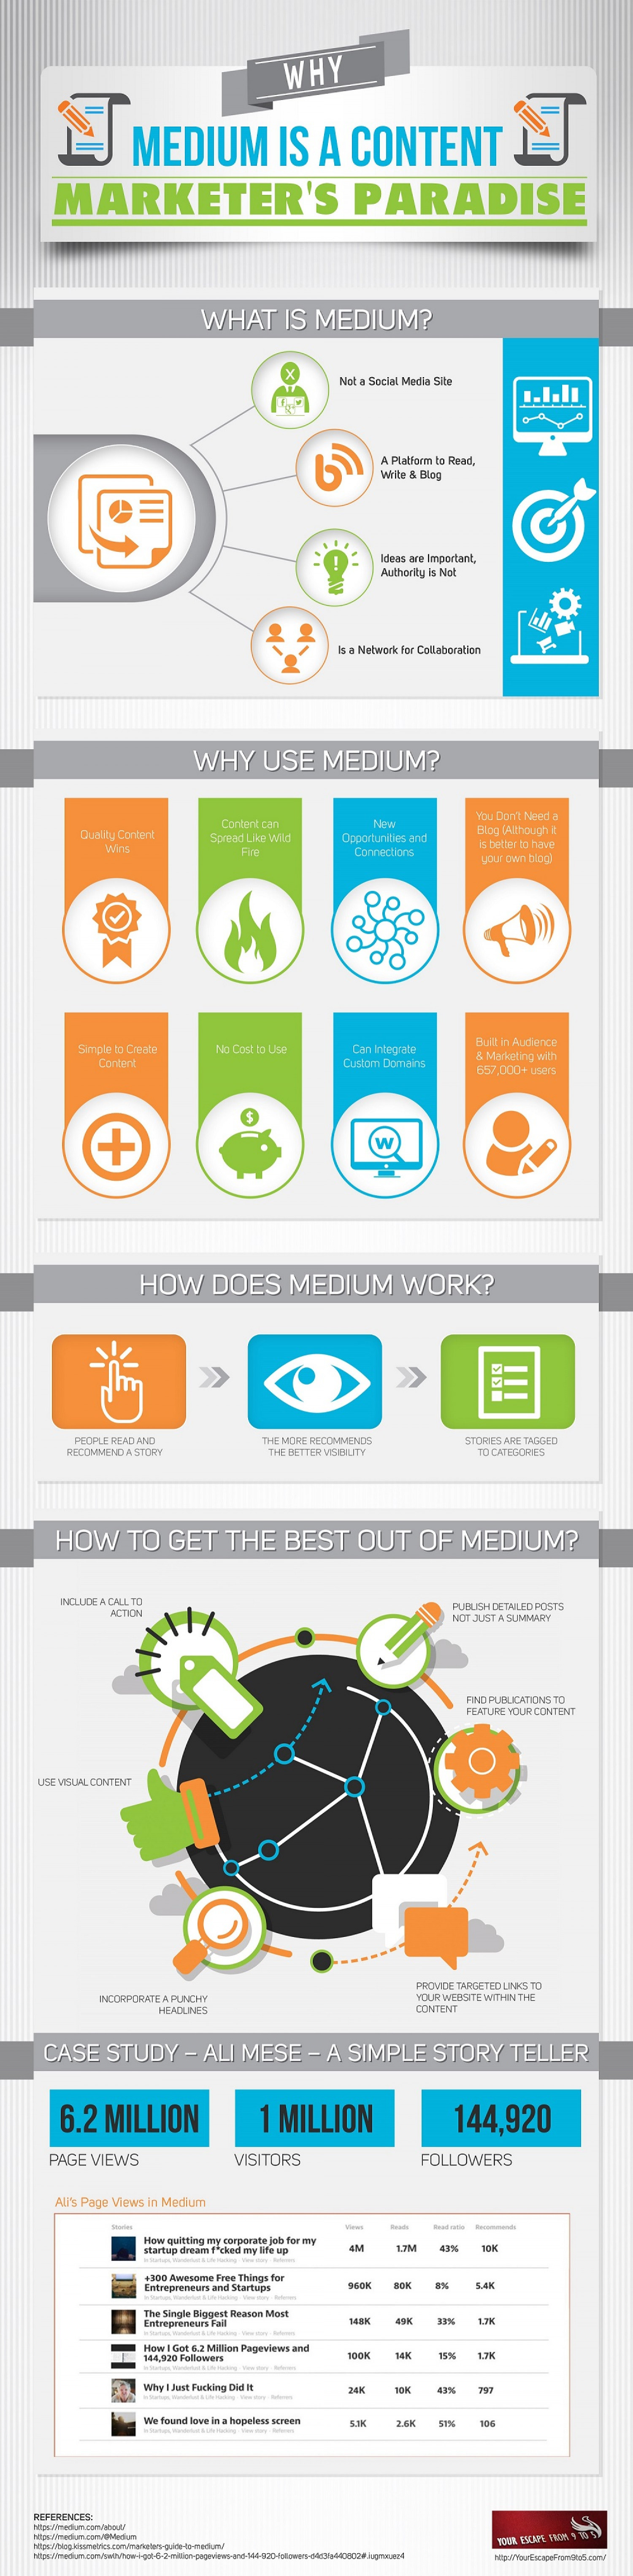 Why Medium is a Content Marketing Paradise Infographic